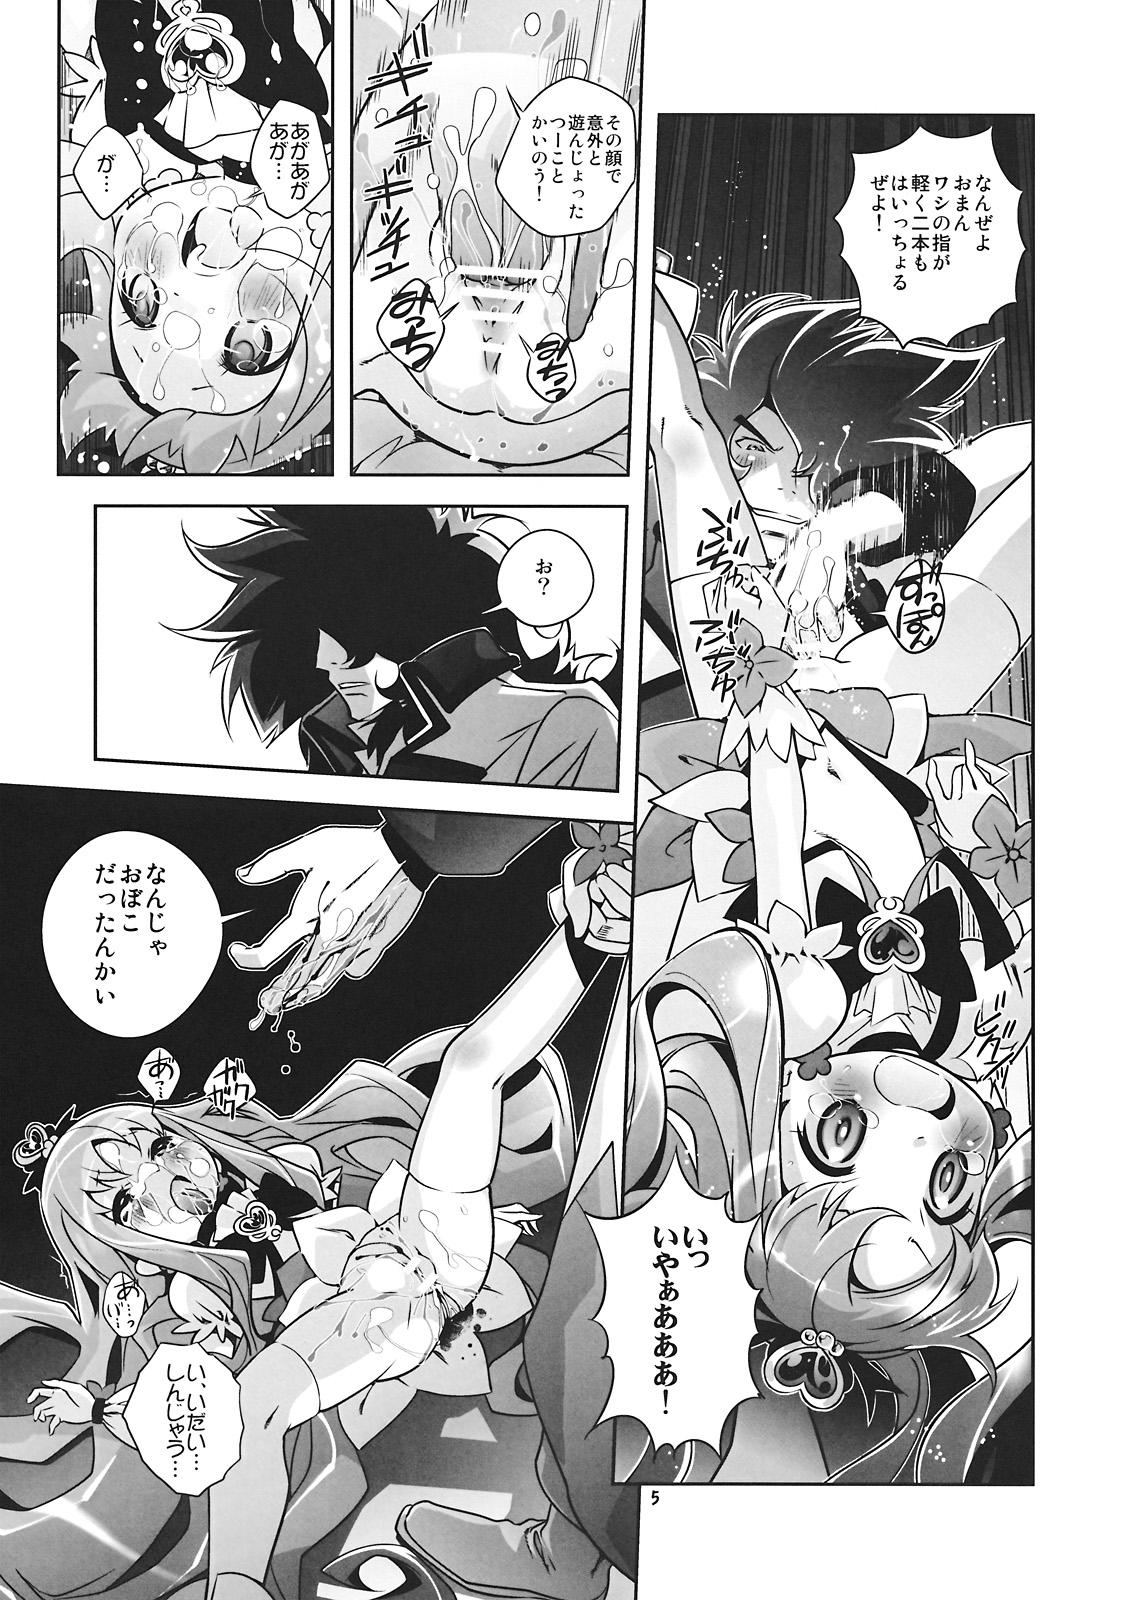 Best Blowjob Ever Reaped flower - Heartcatch precure Tribbing - Page 5